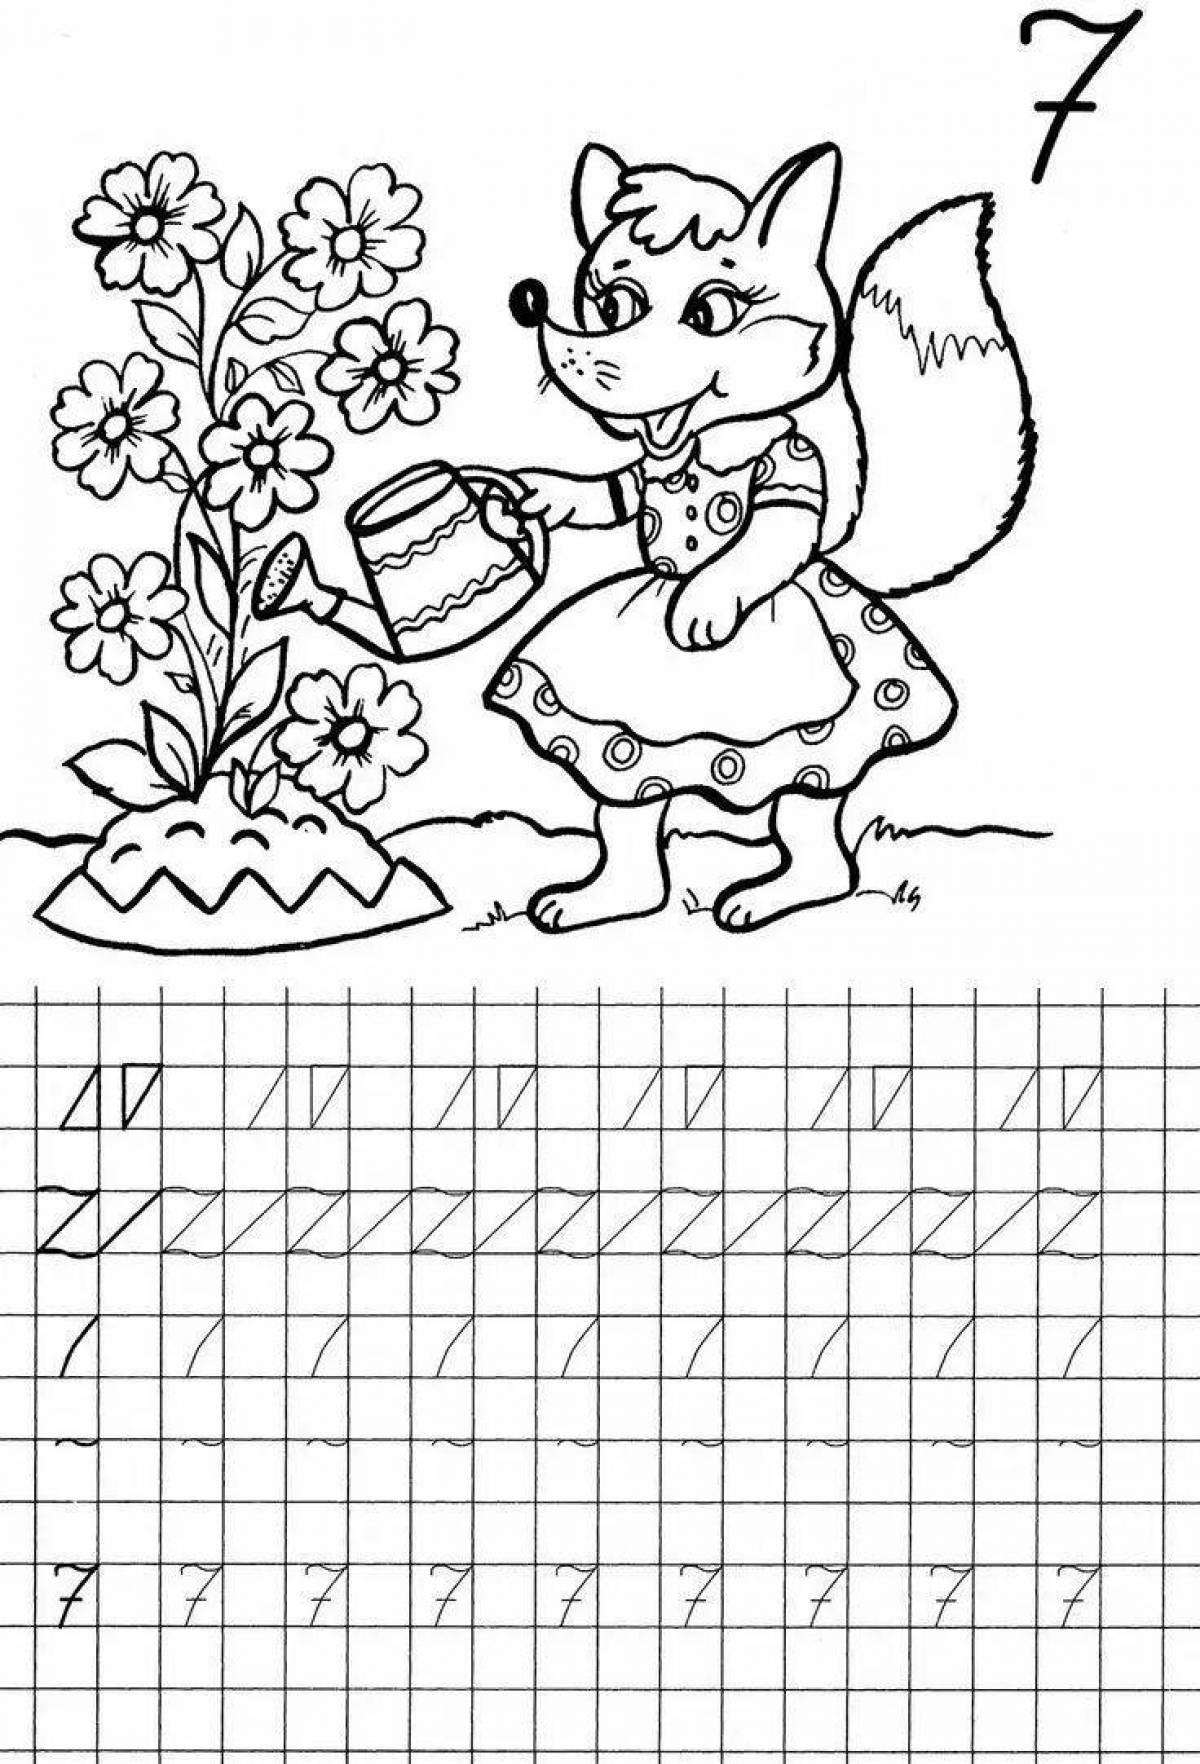 Coloring pages with great numbers